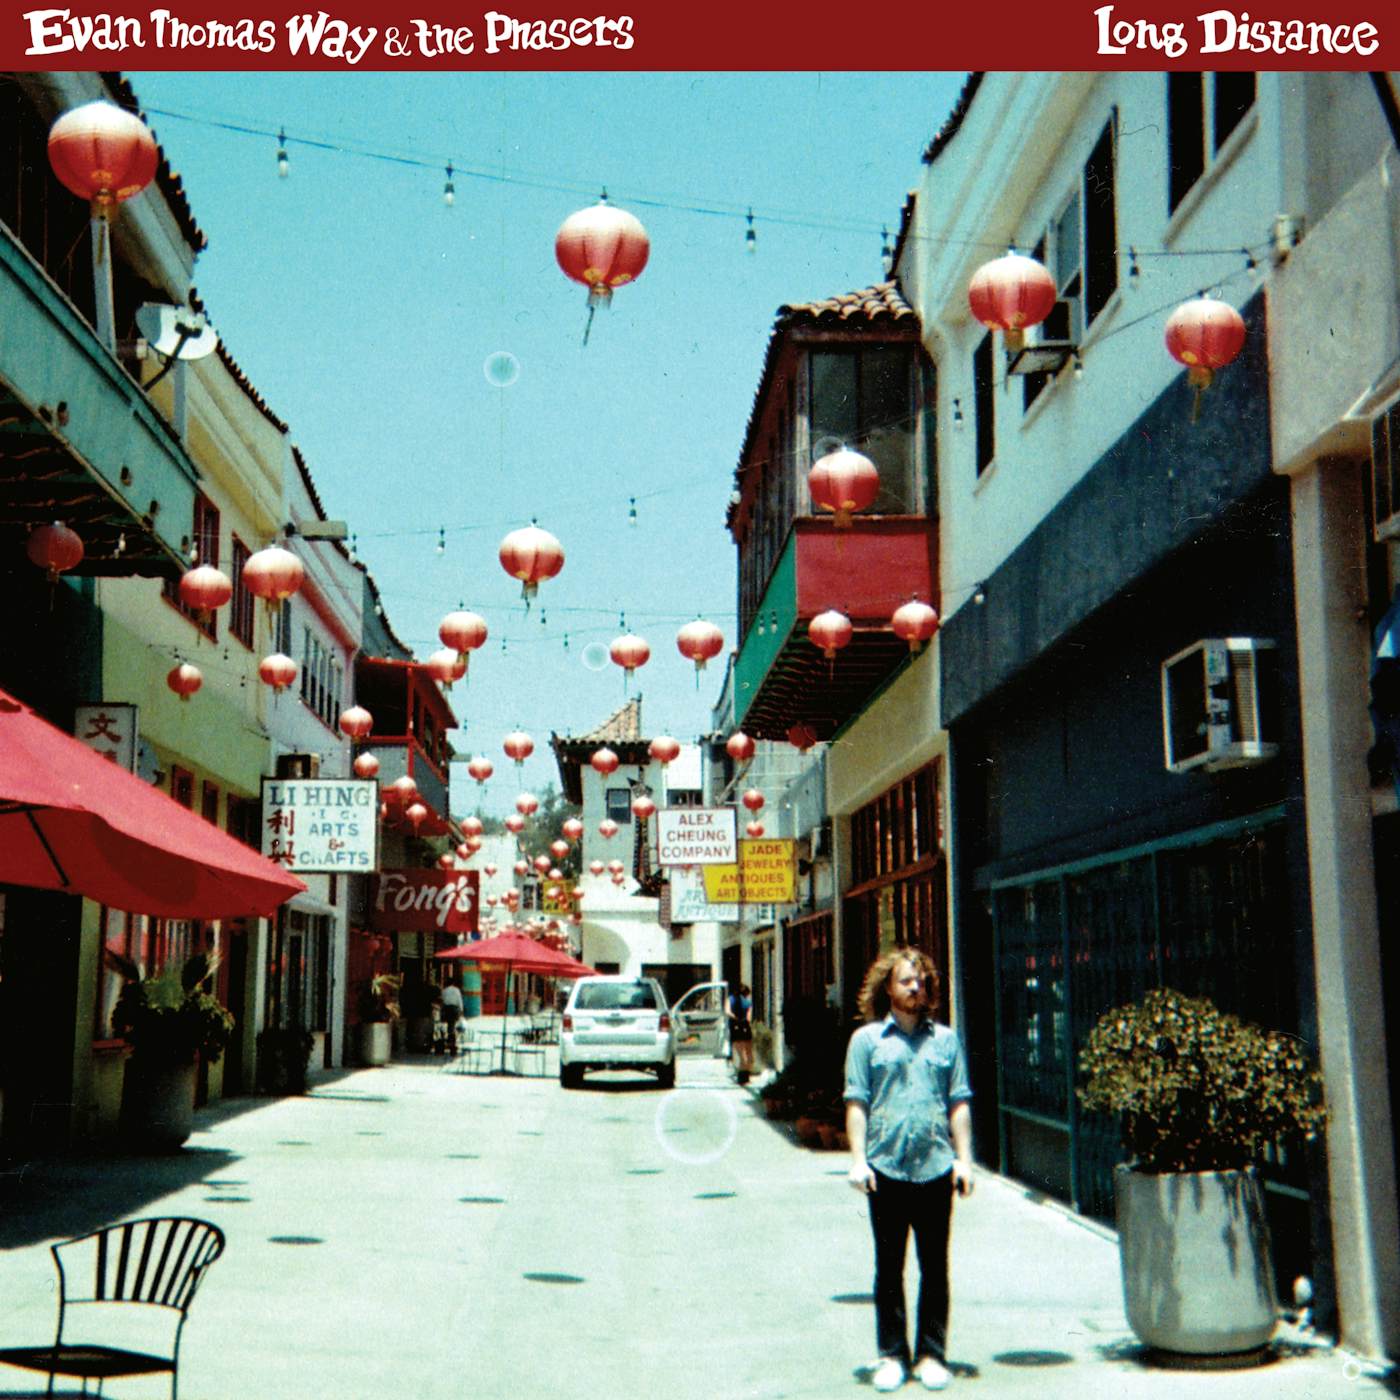 Evan Thomas Way & The Phasers Long Distance Vinyl Record